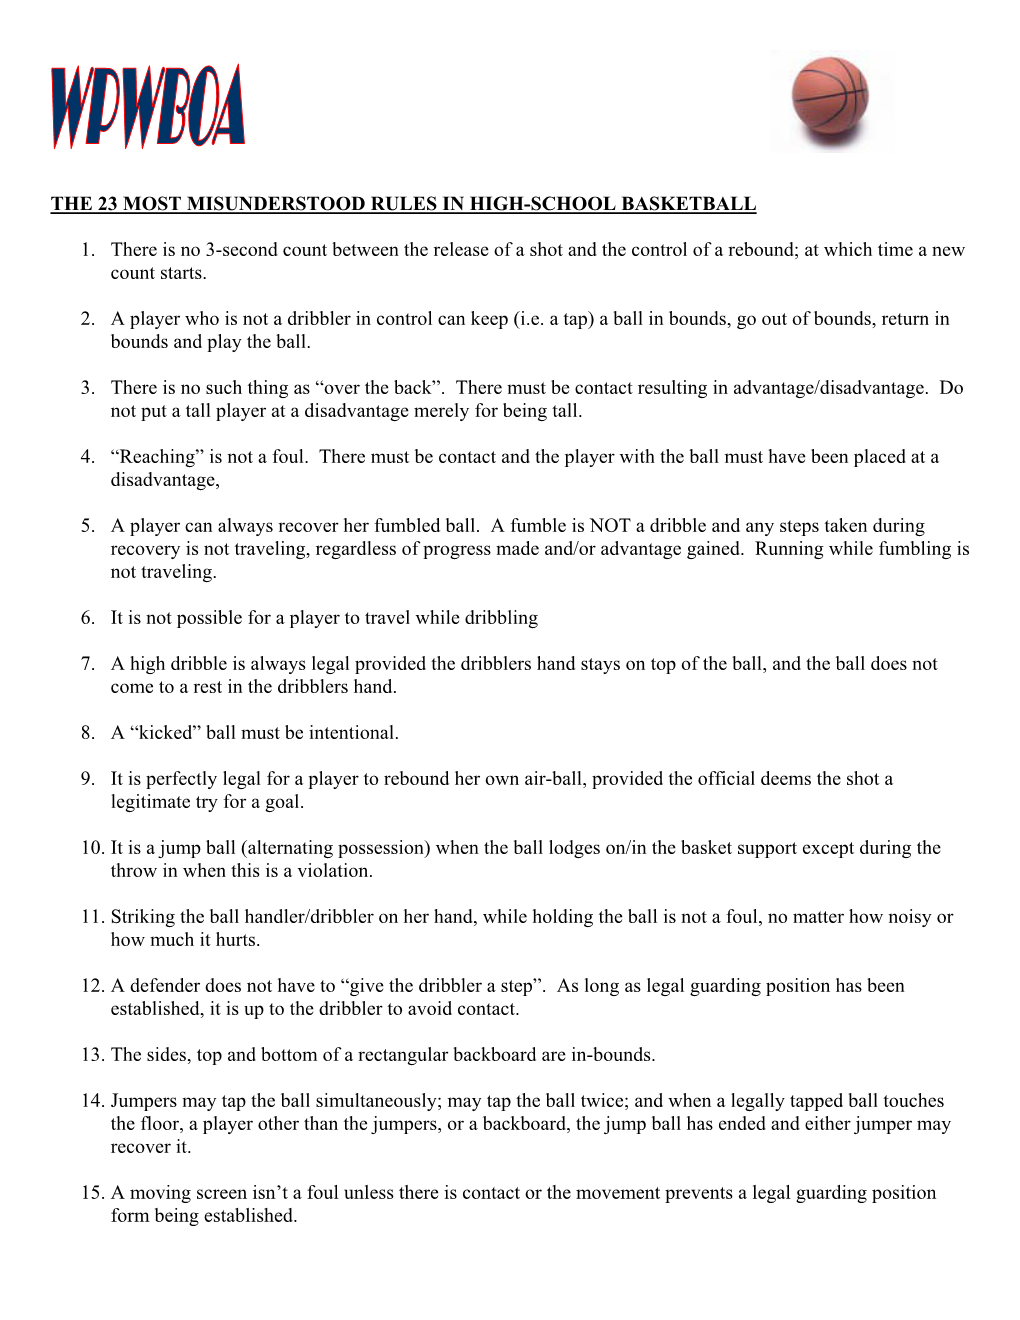 The 23 Most Misunderstood Rules in High-School Basketball